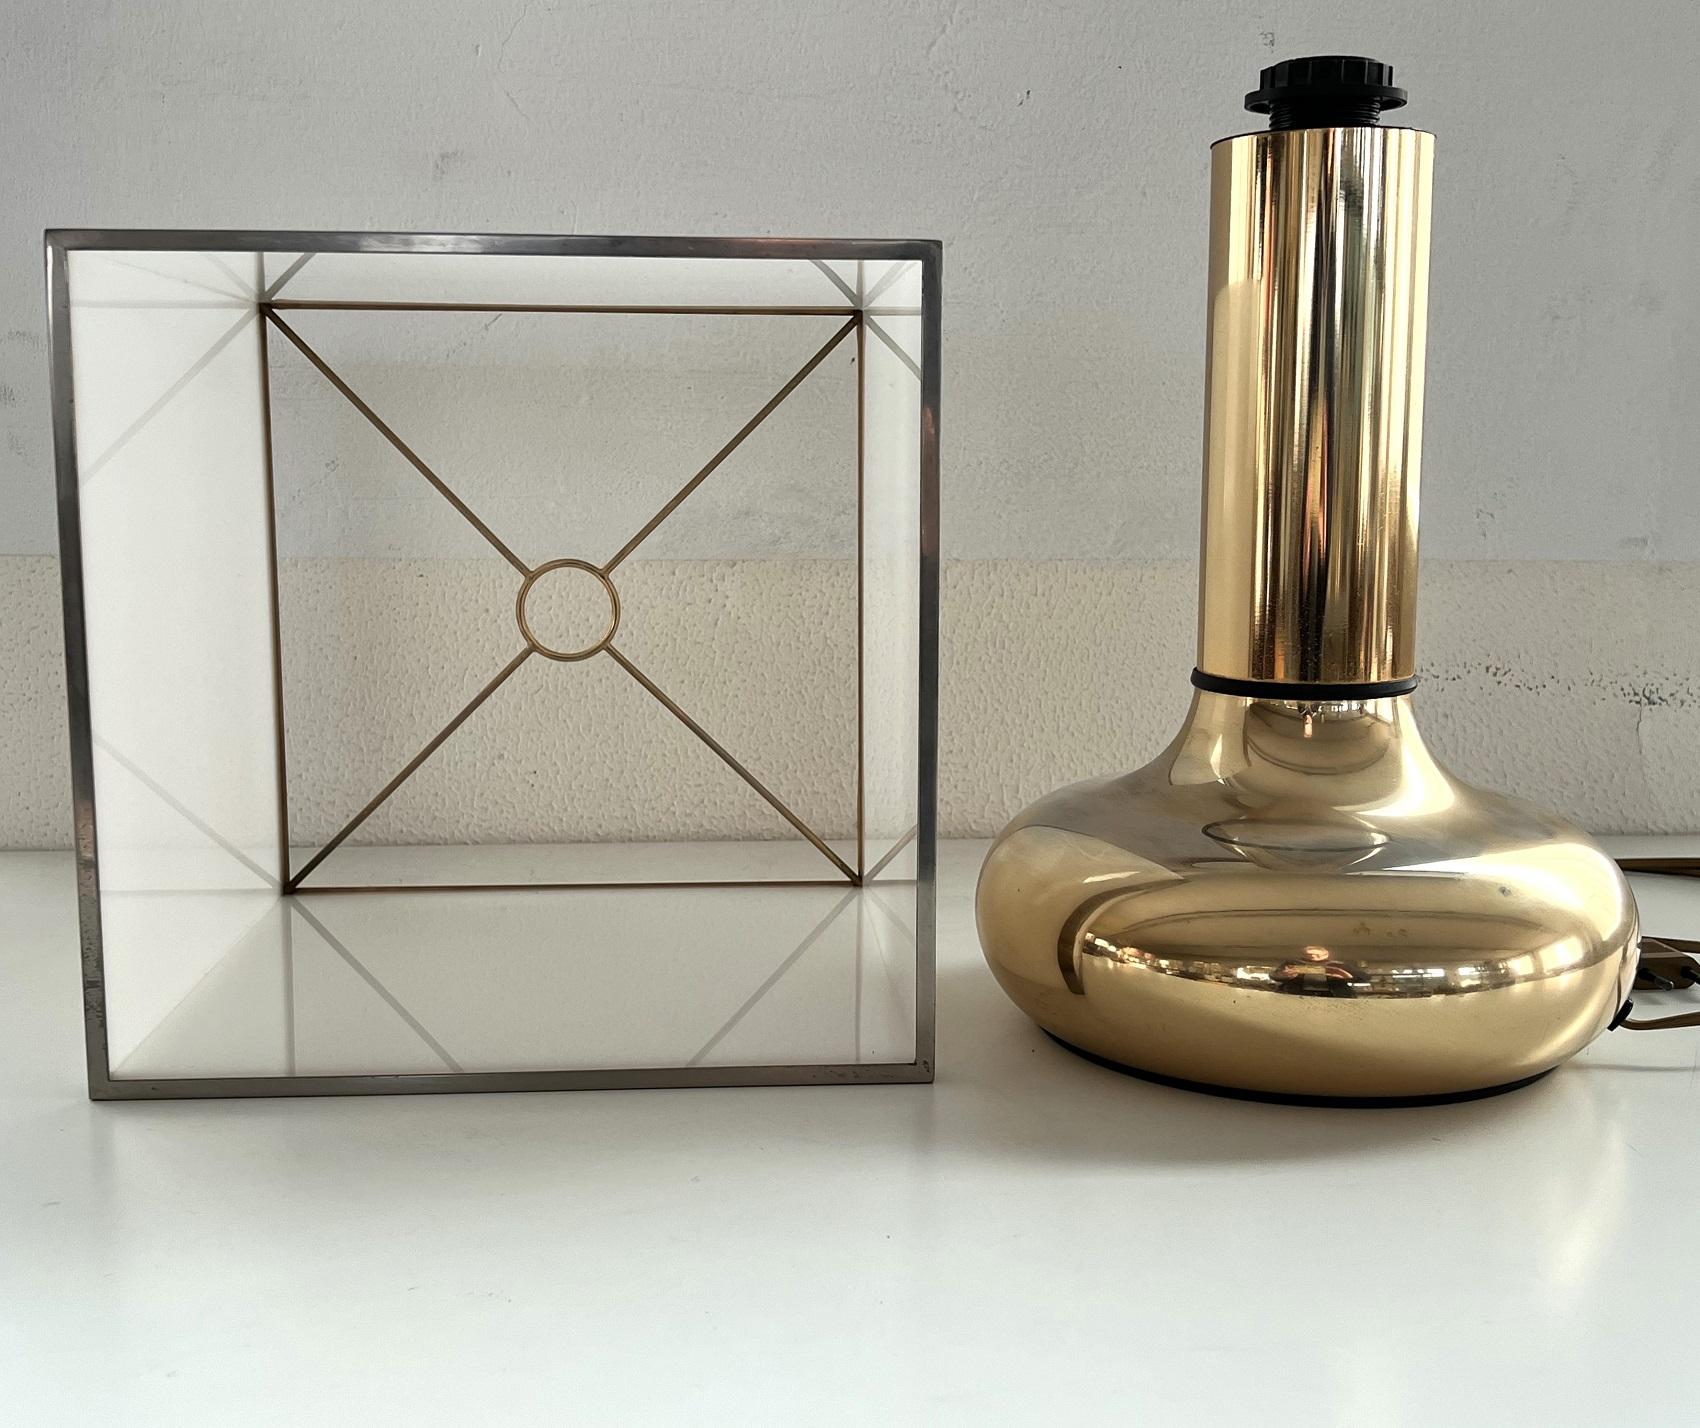 Italian Metal Table Lamp with Square Perspex Lampshade, 1970s For Sale 7